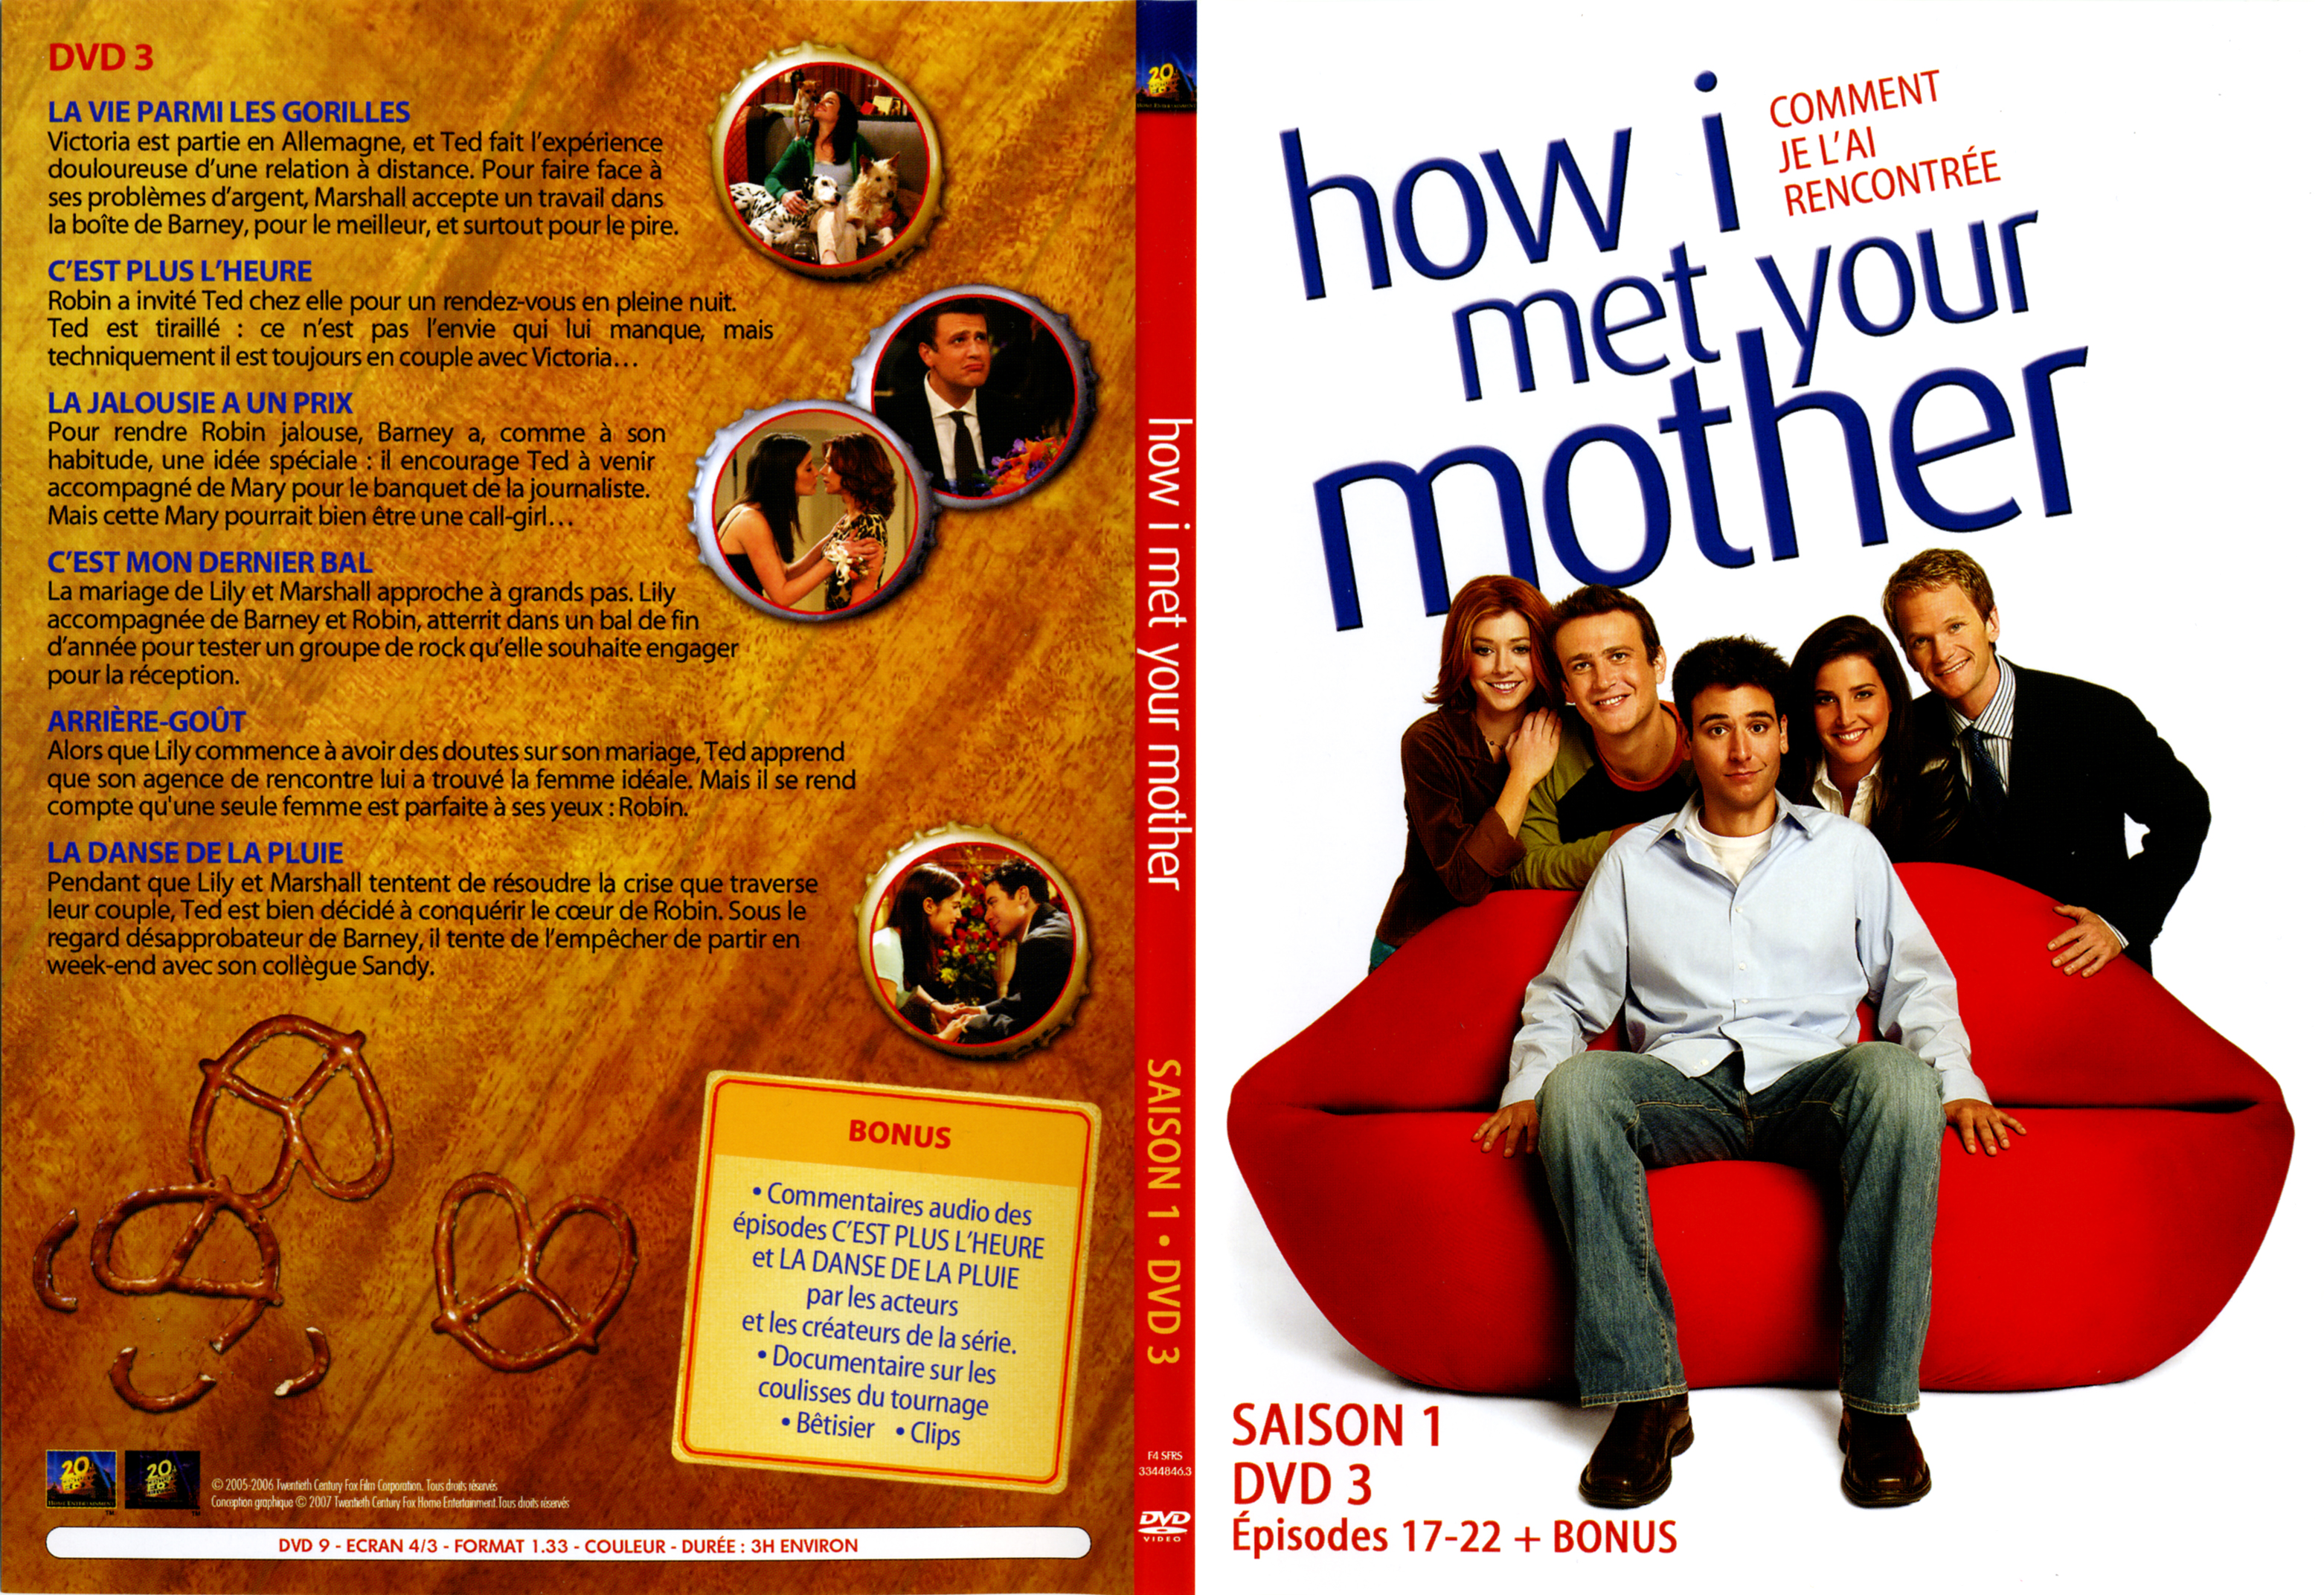 Jaquette DVD How i met your mother Saison 1 DVD 3